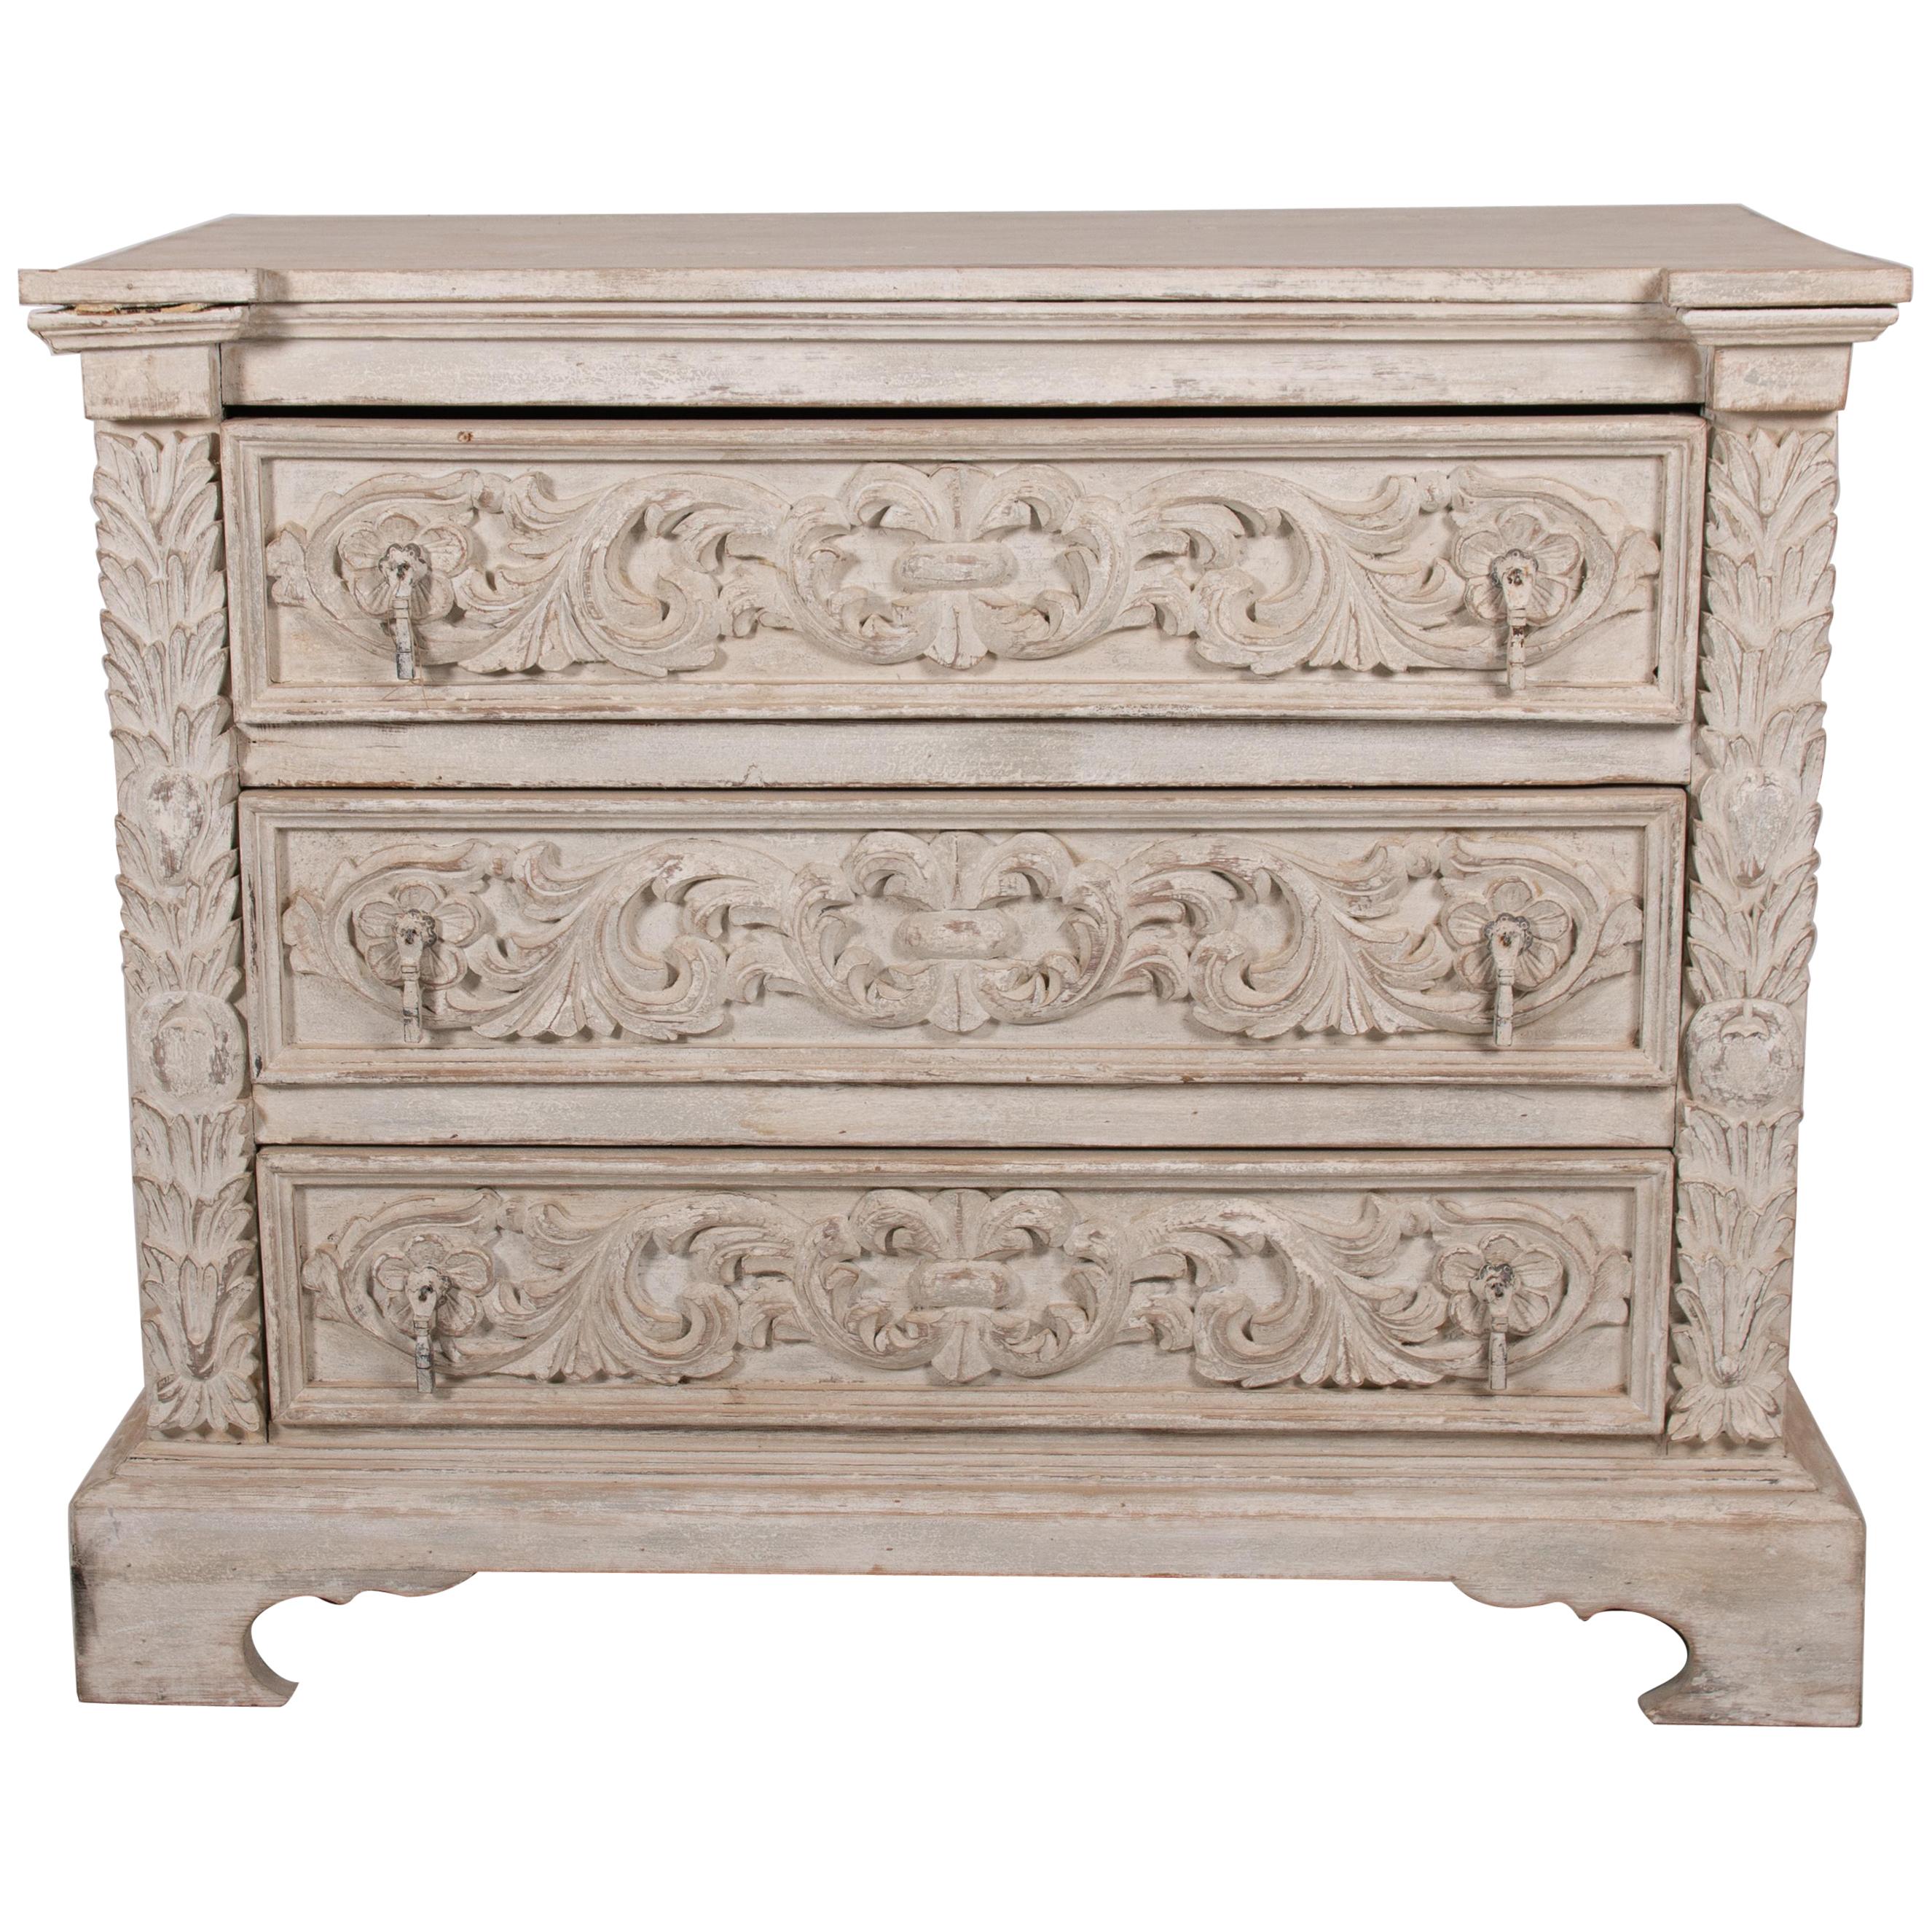 Whitewashed Antique Chest of Drawers with Hand-carved Leaf Motif